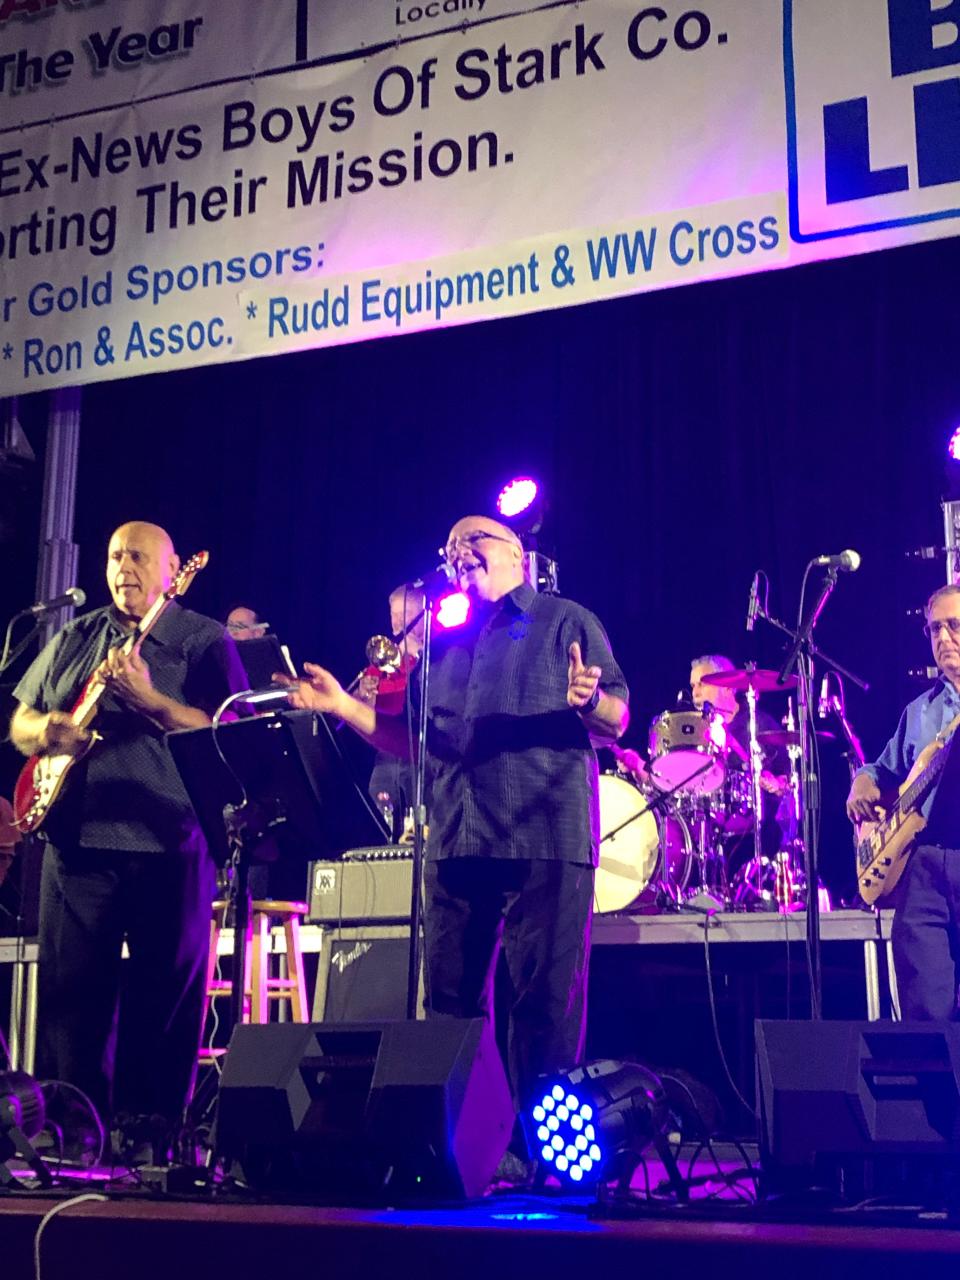 Jimmy & the Soul Blazers performs Friday at the Pizza Oven Charities Benefit Dance for the Canton Ex-Newsboys in the Canton Memorial Civic Center.